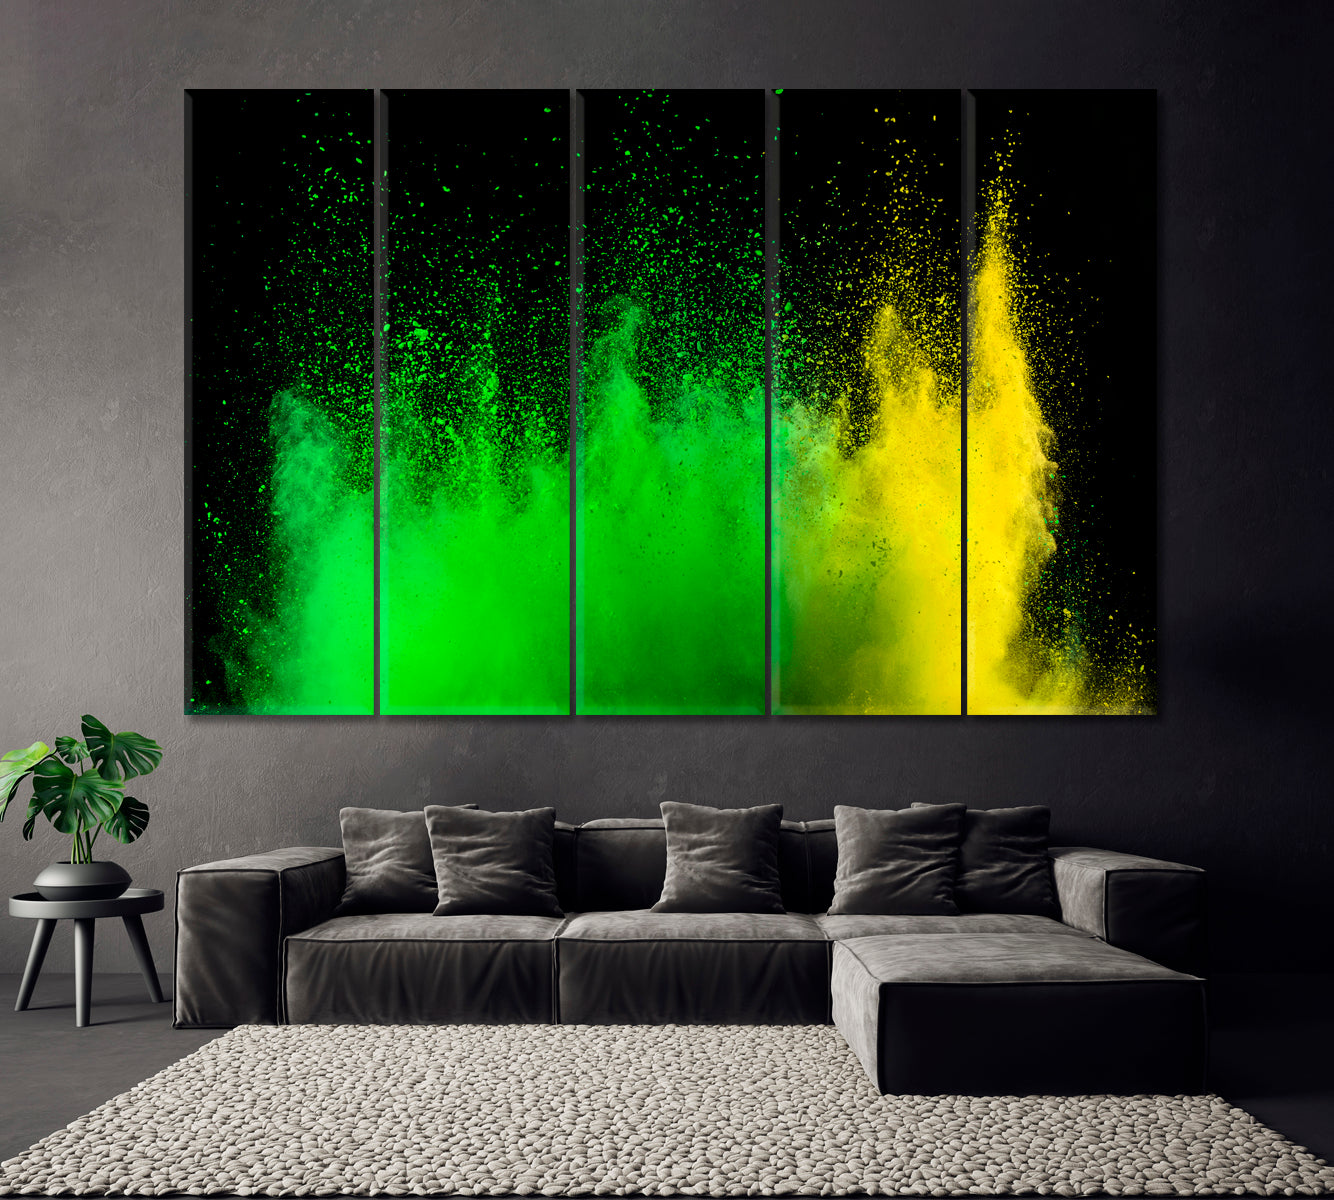 Explosion of Colored Powder Canvas Print ArtLexy 5 Panels 36"x24" inches 